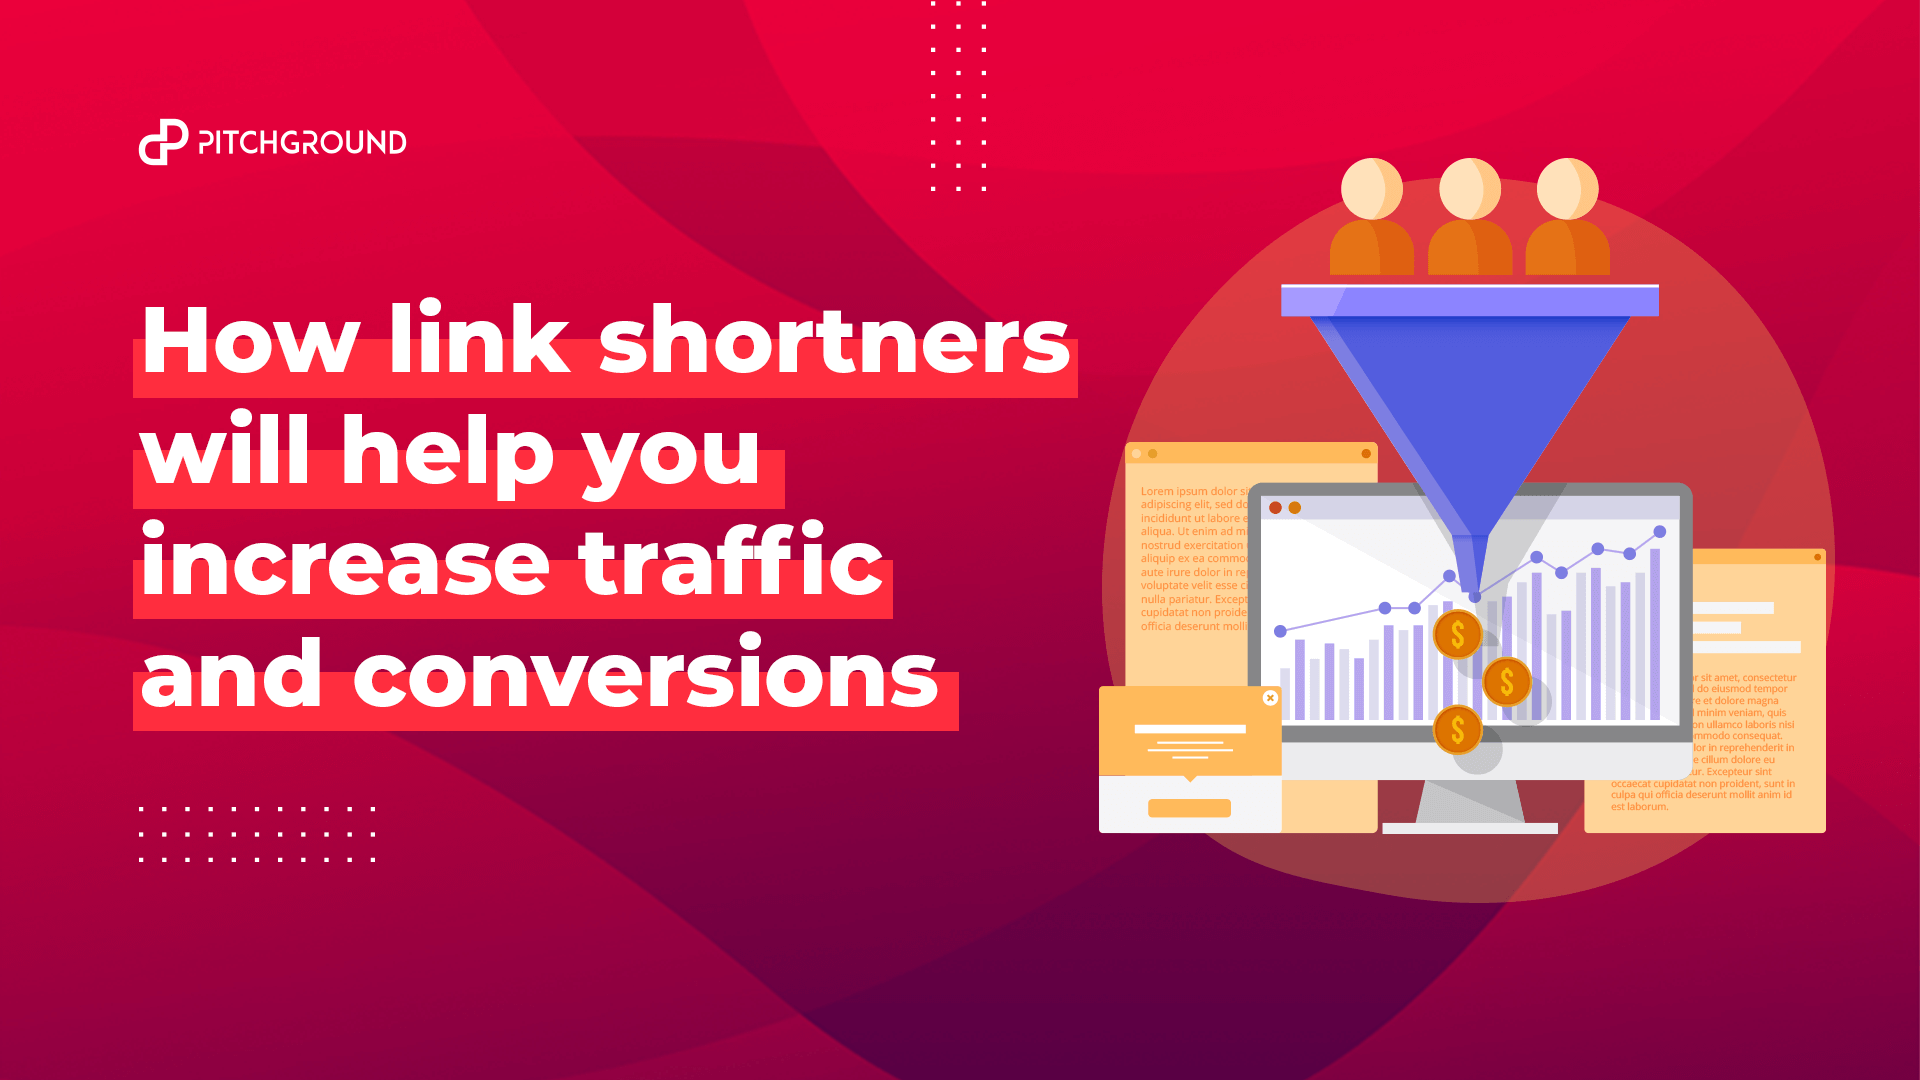 Using link shorteners to increase your traffic